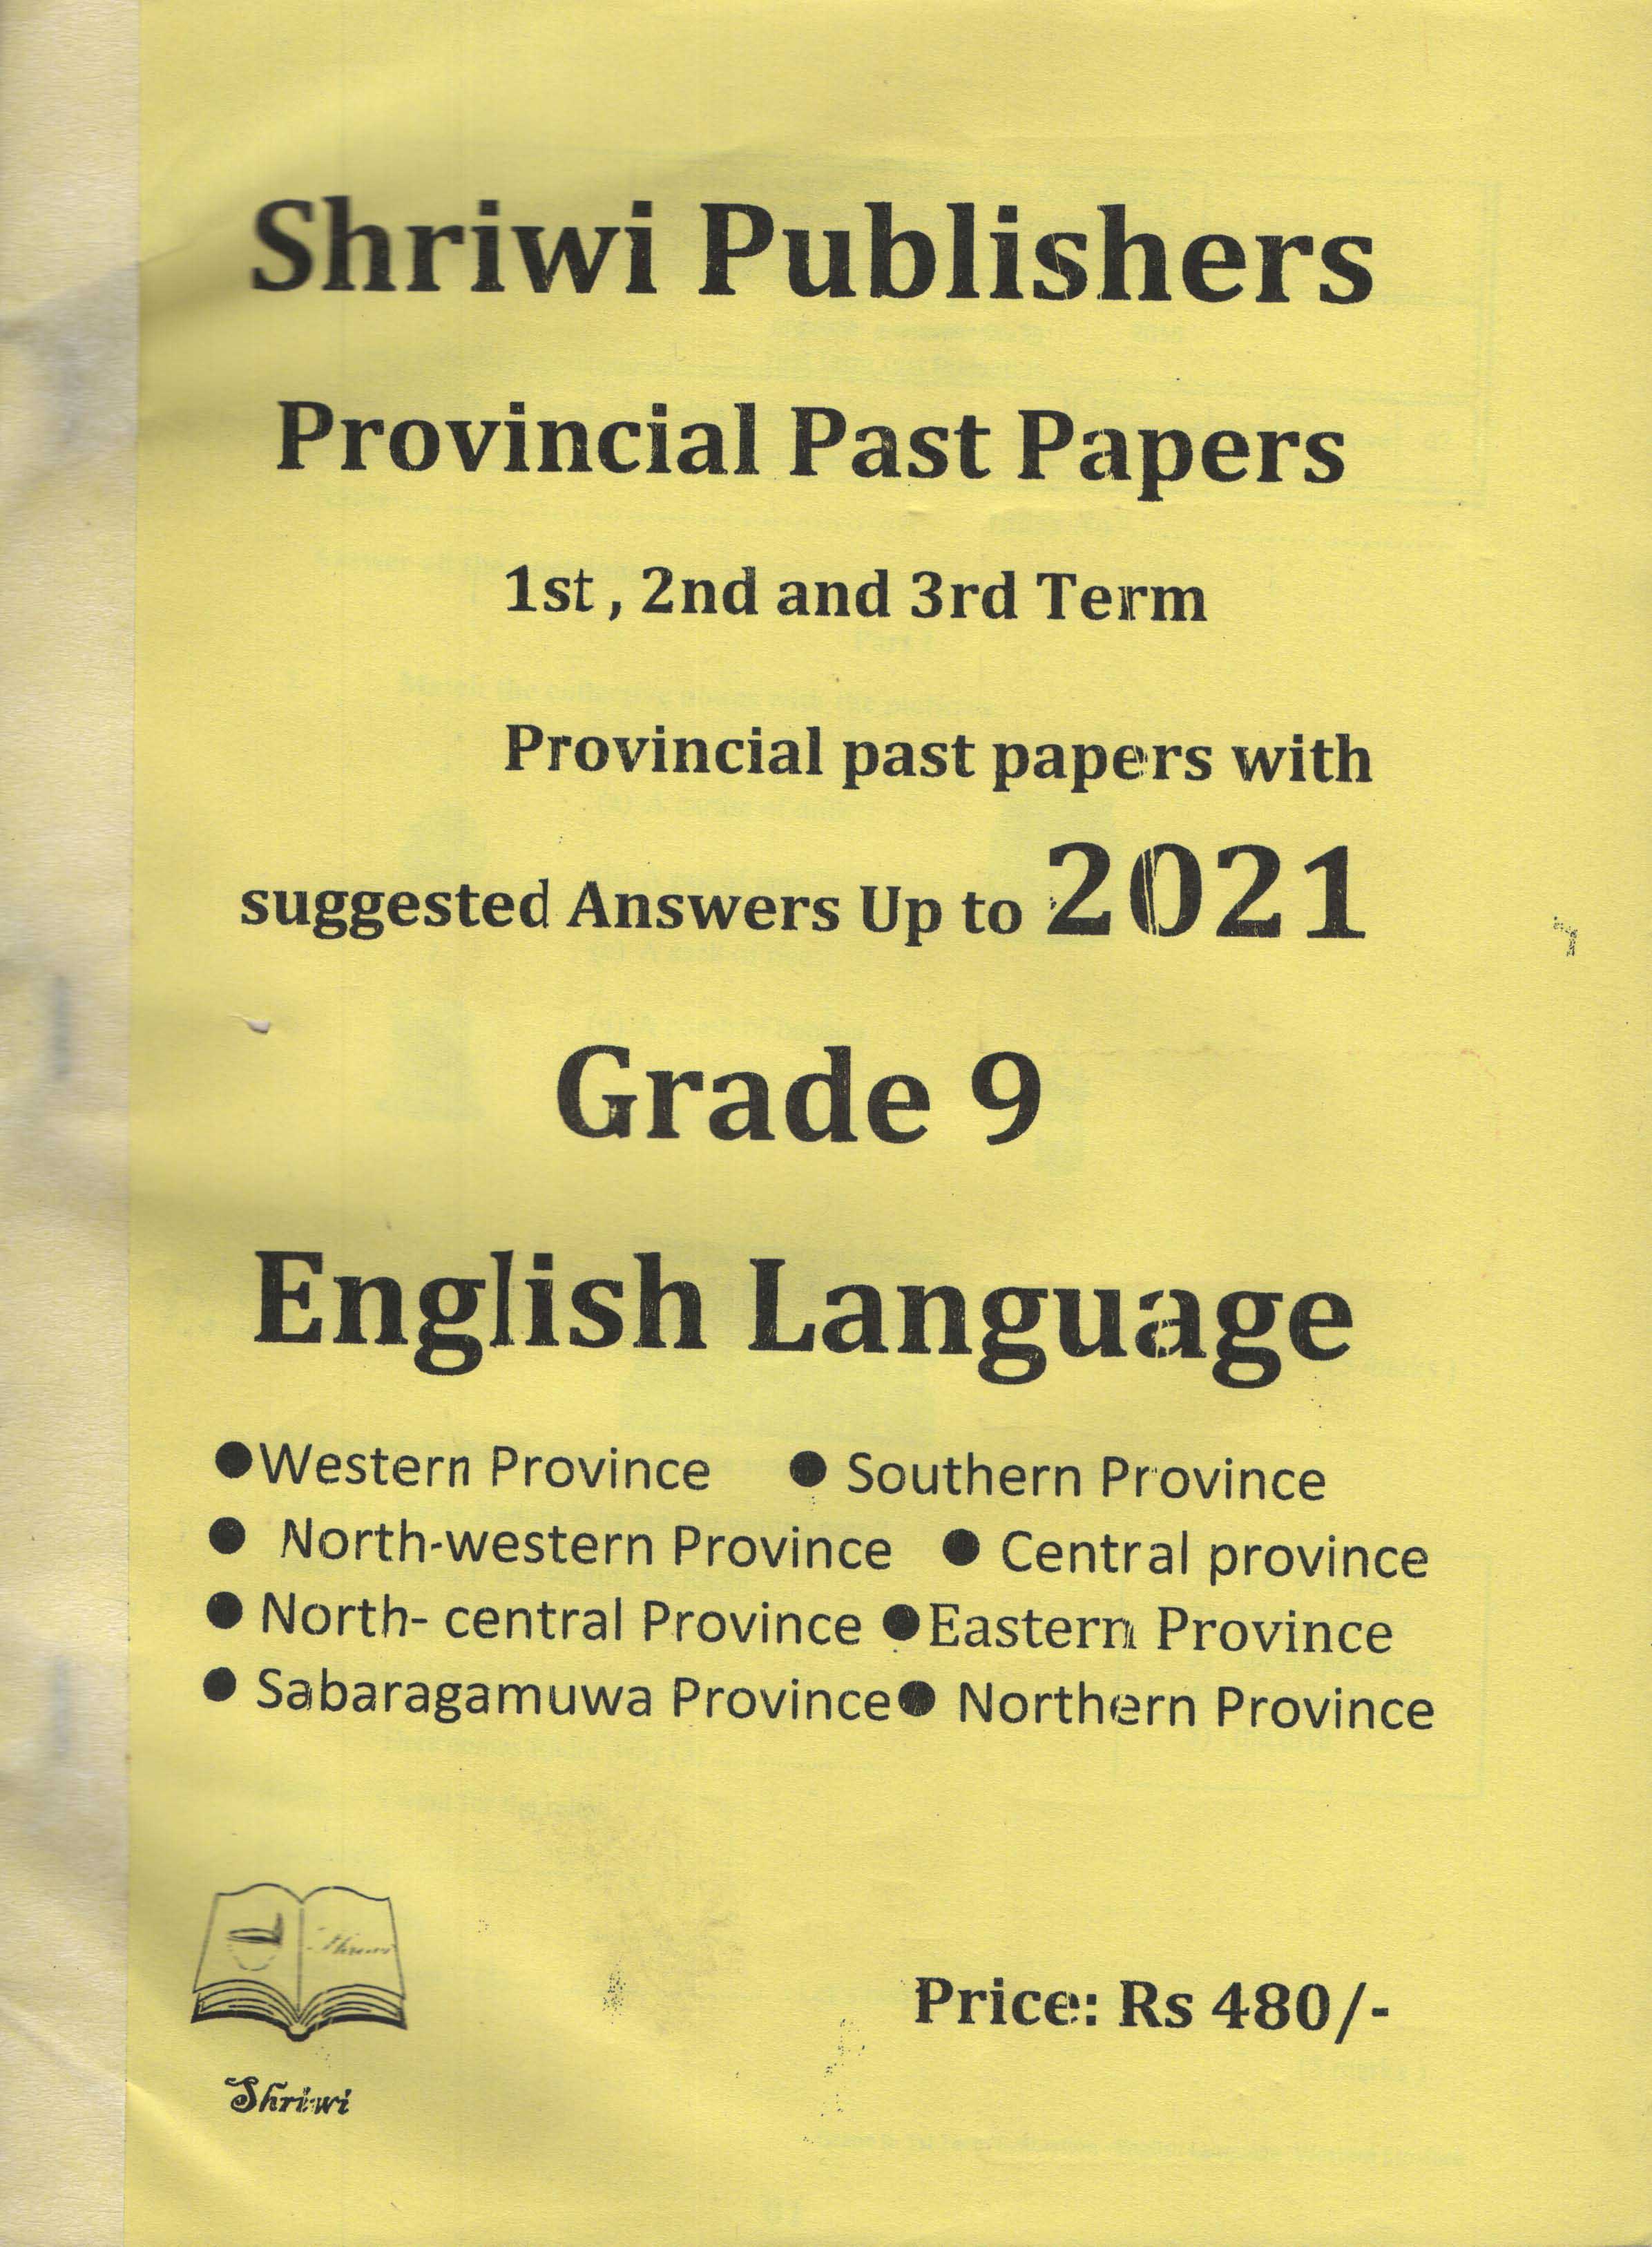 Shriwi Grade 9 English Language  Provincial Past Papers 1st 2nd & 3rd Terms Provincial Past Papers with Suggested Answers up to 2020 